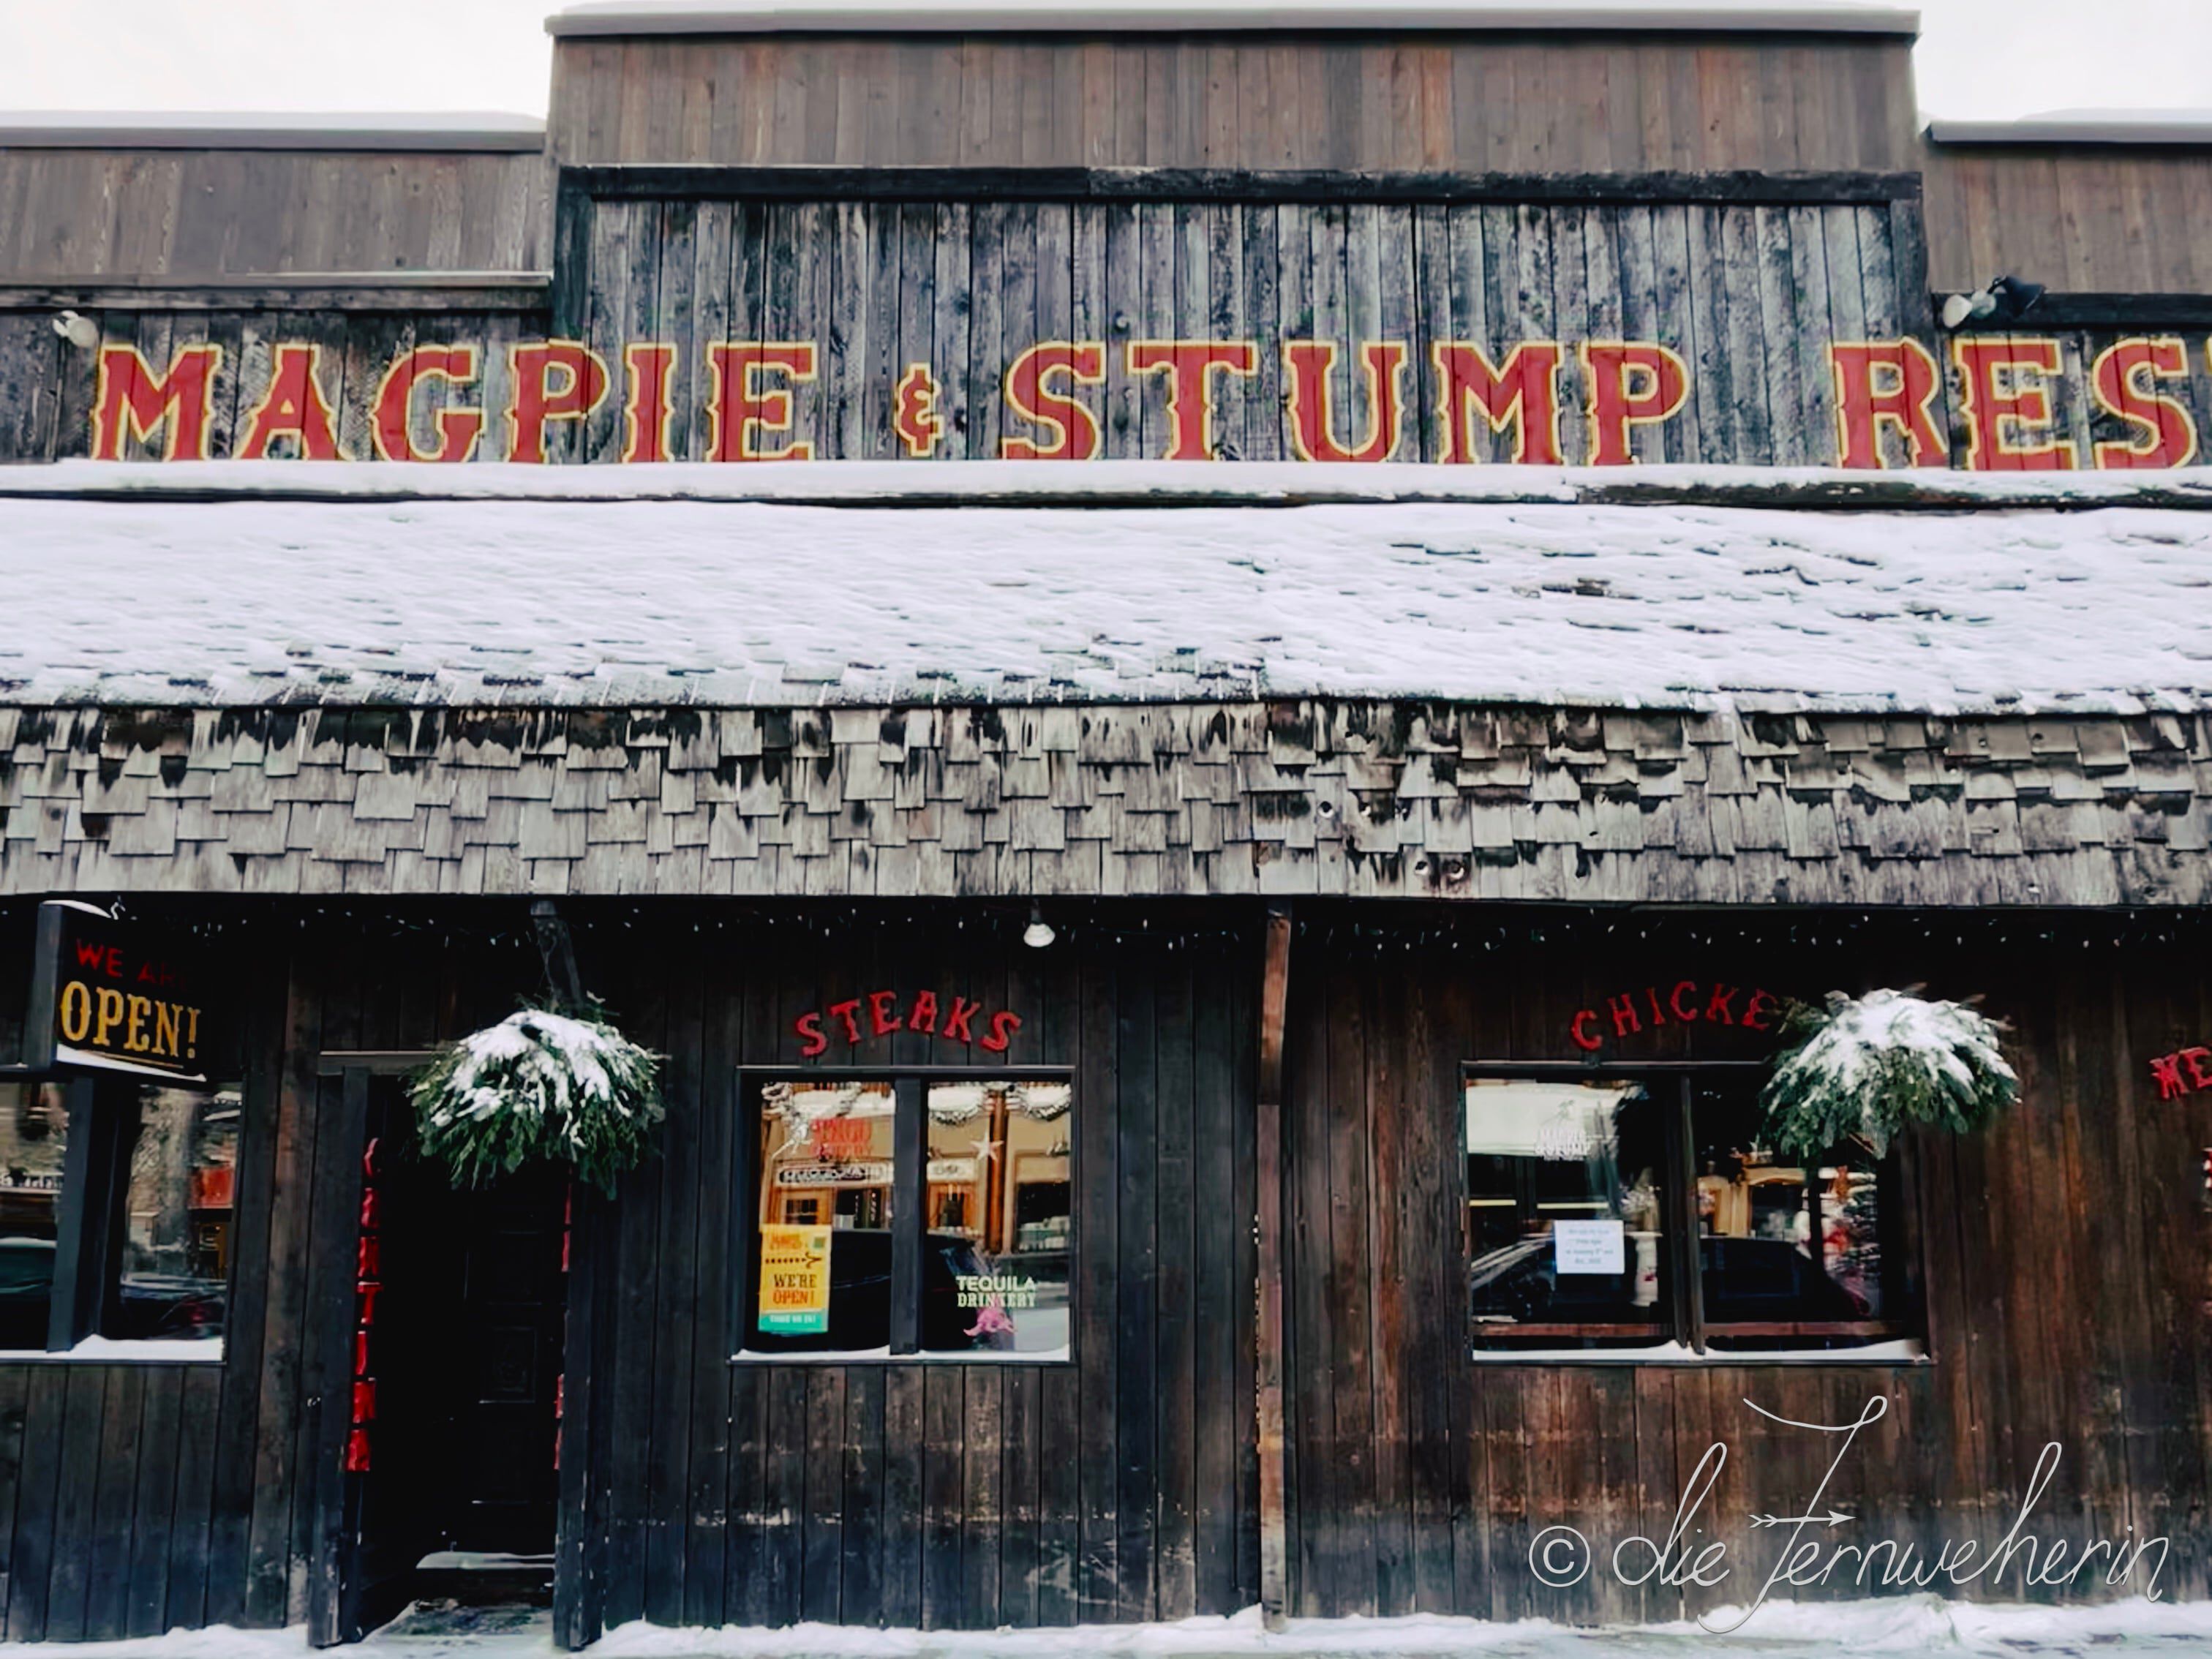 Exterior view of Magpie & Stump, a restaurant in the town of Banff.